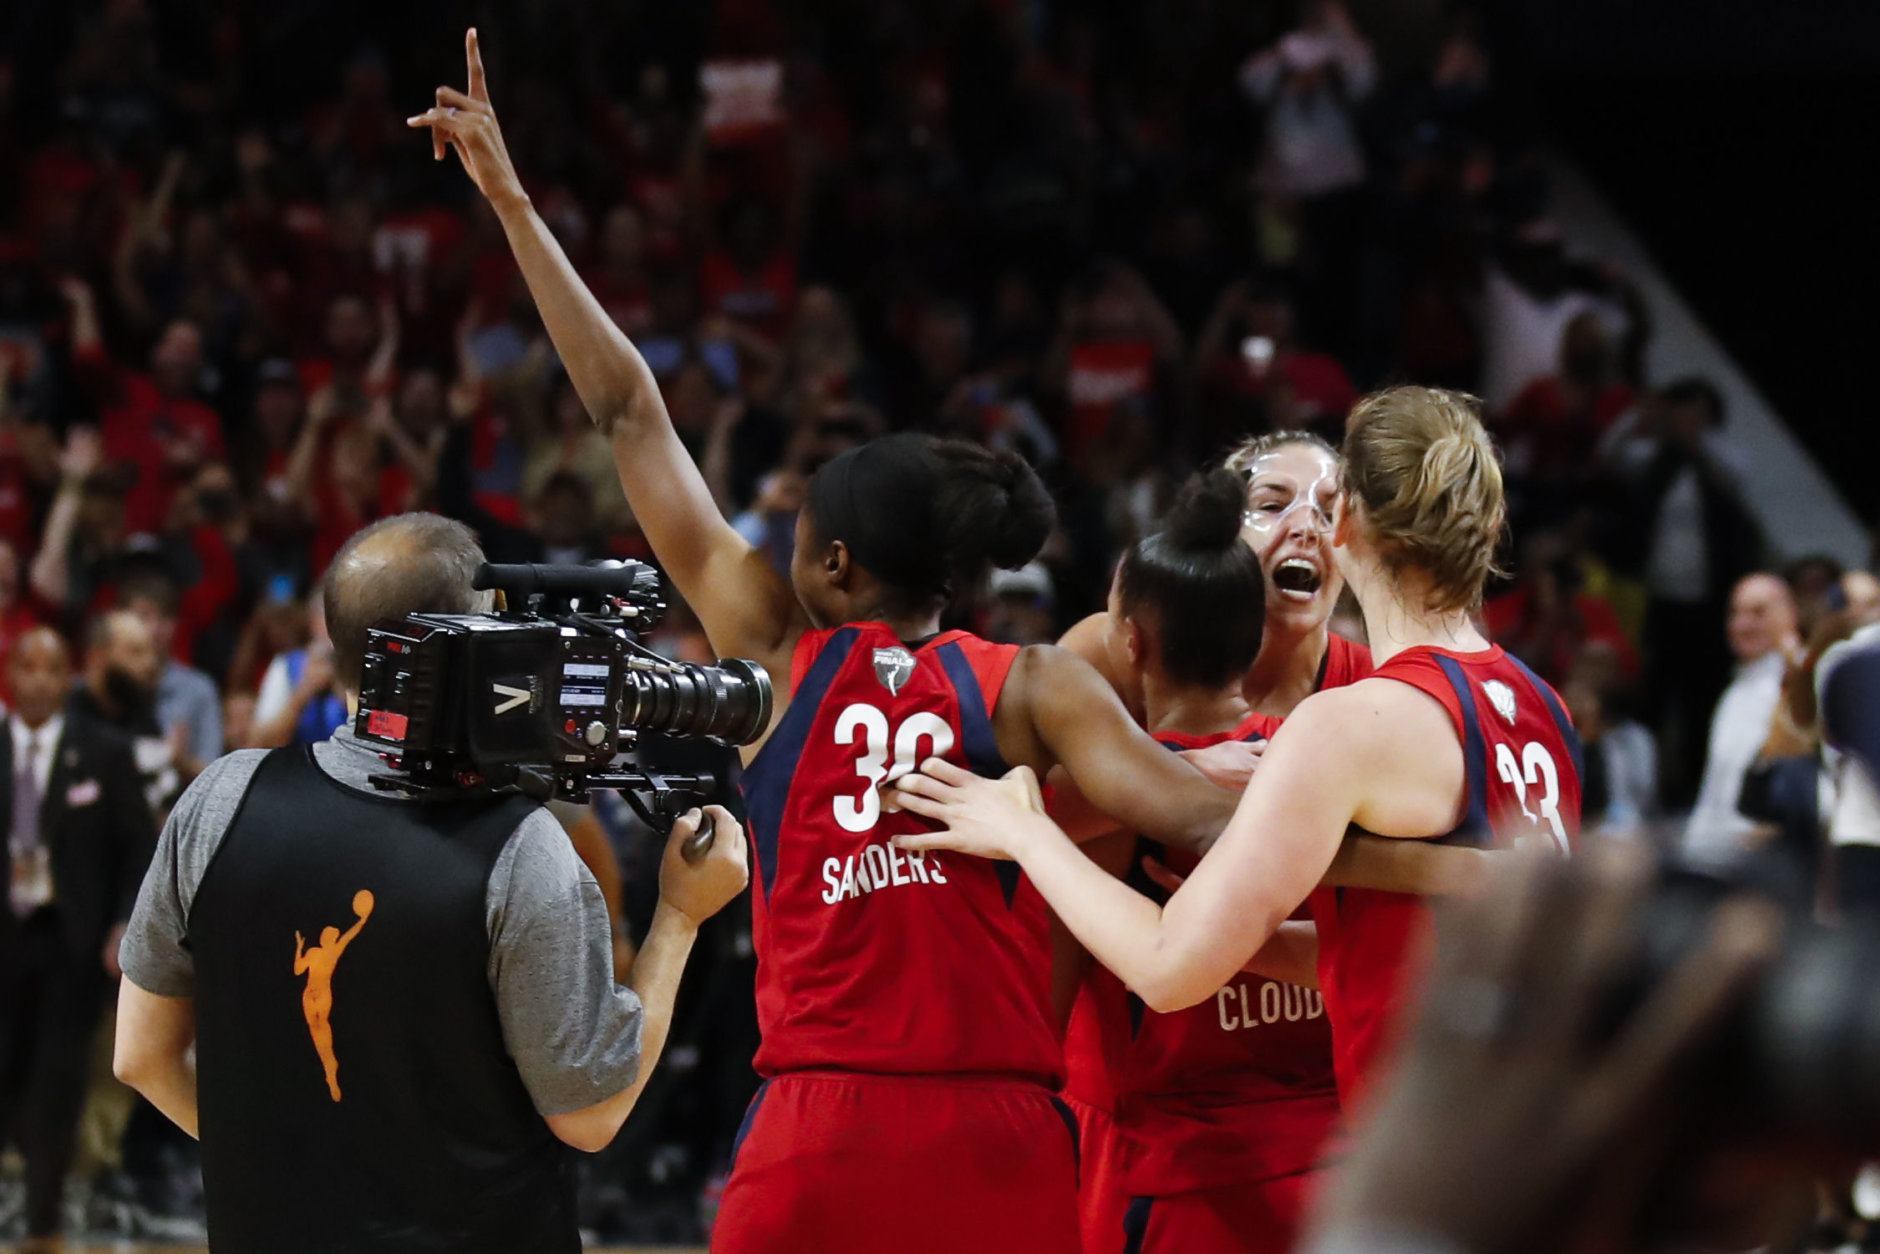 <h2>Mystics magic</h2>
<p>Regardless of how they played, 2019 was always going to be special for the Washington Mystics.</p>
<p>Even though the team had been a longtime tenant at Capital One Arena, this year was the first time they actually had a home that was theirs first and foremost: The brand-new Entertainment and Sports Arena in Congress Heights.</p>
<p>Their housewarming gift to the new venue: a best-ever regular season record of 26-8. Behind WNBA Regular Season <a href="https://wtop.com/washington-mystics/2019/09/mystics-versatile-forward-elena-delle-donne-named-wnba-mvp/" target="_blank" rel="noopener">MVP Elena Della Donne</a>, the Mystics trounced their way to the playoffs, where they were the favorites.</p>
<p>Last year, the team had almost gone all the way, making it to the finals before being swept by the Seattle Storm in the finals.</p>
<p>This year, Coach Mike Thibault’s team <a href="https://wtop.com/washington-mystics/2019/09/mystics-top-aces-94-90-advance-to-wnba-finals/" target="_blank" rel="noopener">disposed of Las Vegas in four games</a> in the semifinals before getting pushed to the limit by Connecticut. But Finals MVP Emma Meesseman scored 22 points in the <a href="https://wtop.com/washington-mystics/2019/10/delle-donne-leads-mystics-to-first-wnba-title/" target="_blank" rel="noopener">89-78 Game Five victory</a> to deliver the franchise its first-ever WNBA title.</p>
<p>Home sweet home, indeed.</p>
<p><em>(Contributed by Dave Preston) </em></p>
